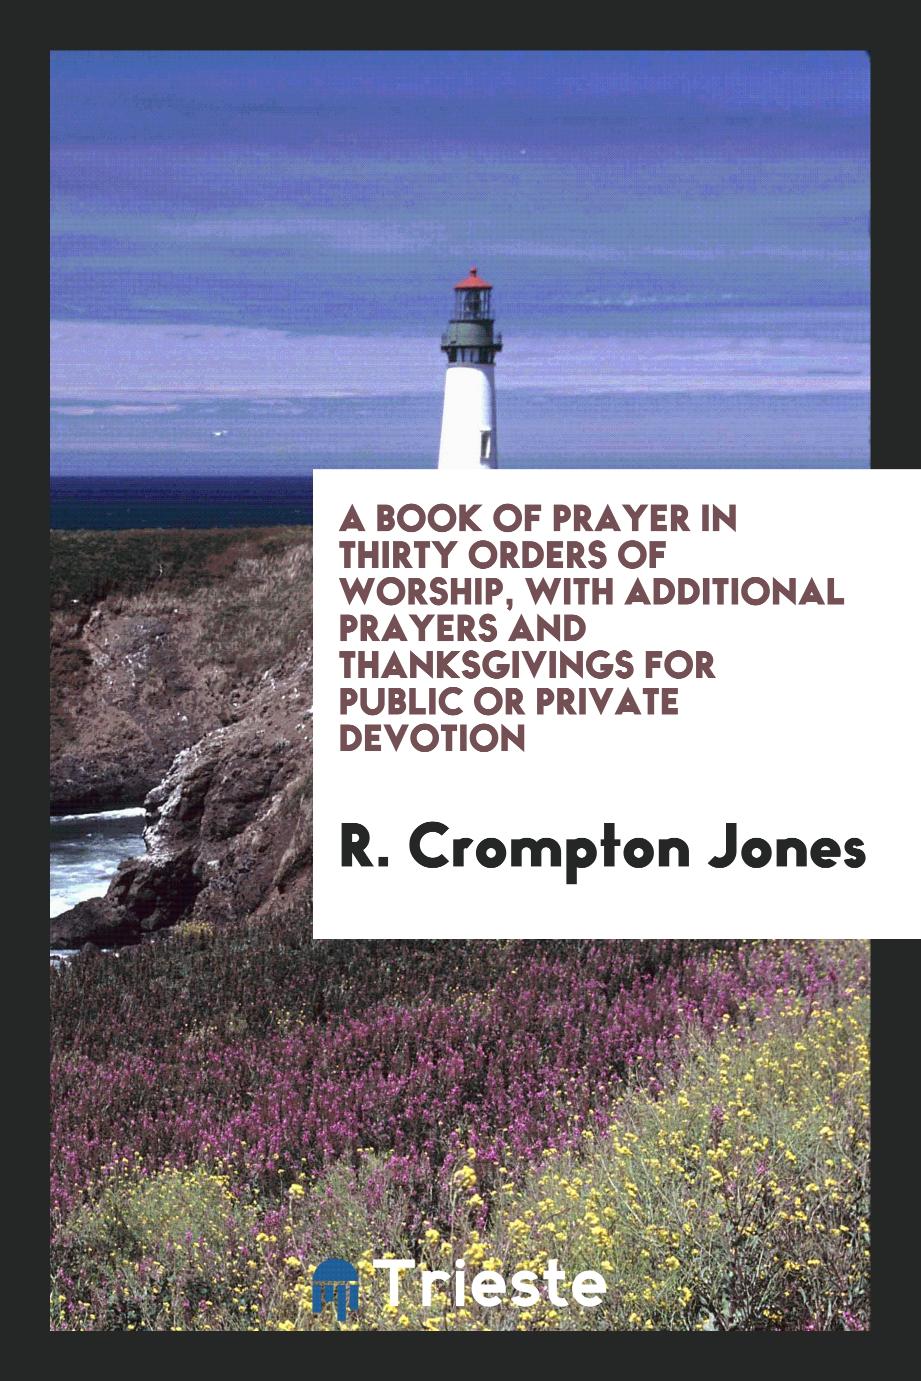 A Book of Prayer in Thirty Orders of Worship, with Additional Prayers and Thanksgivings for Public or Private Devotion